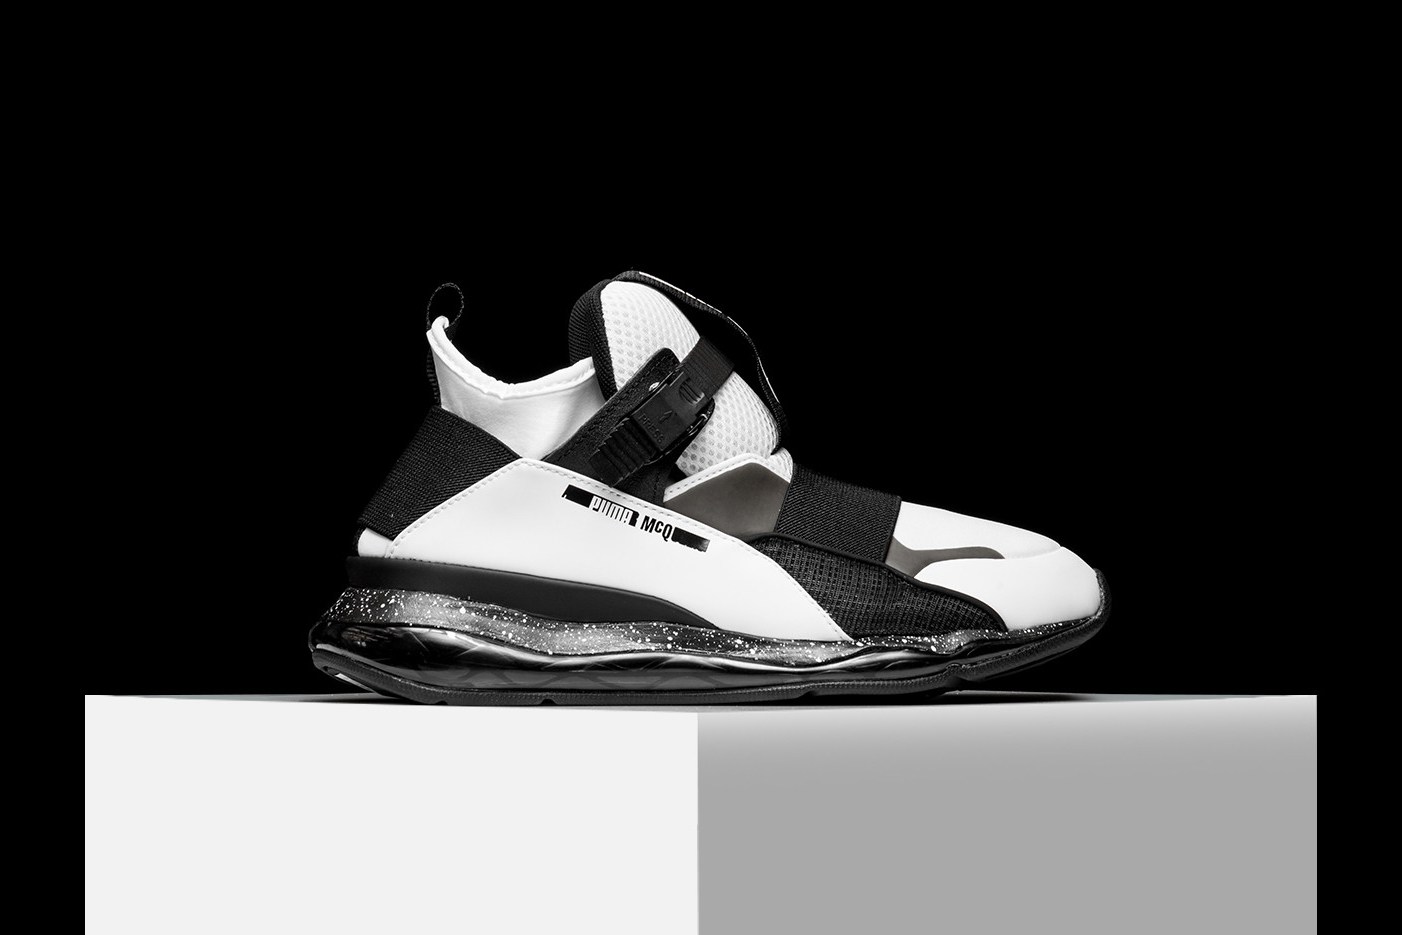 Alexander McQueen x Puma’s Cell Mid Now Available